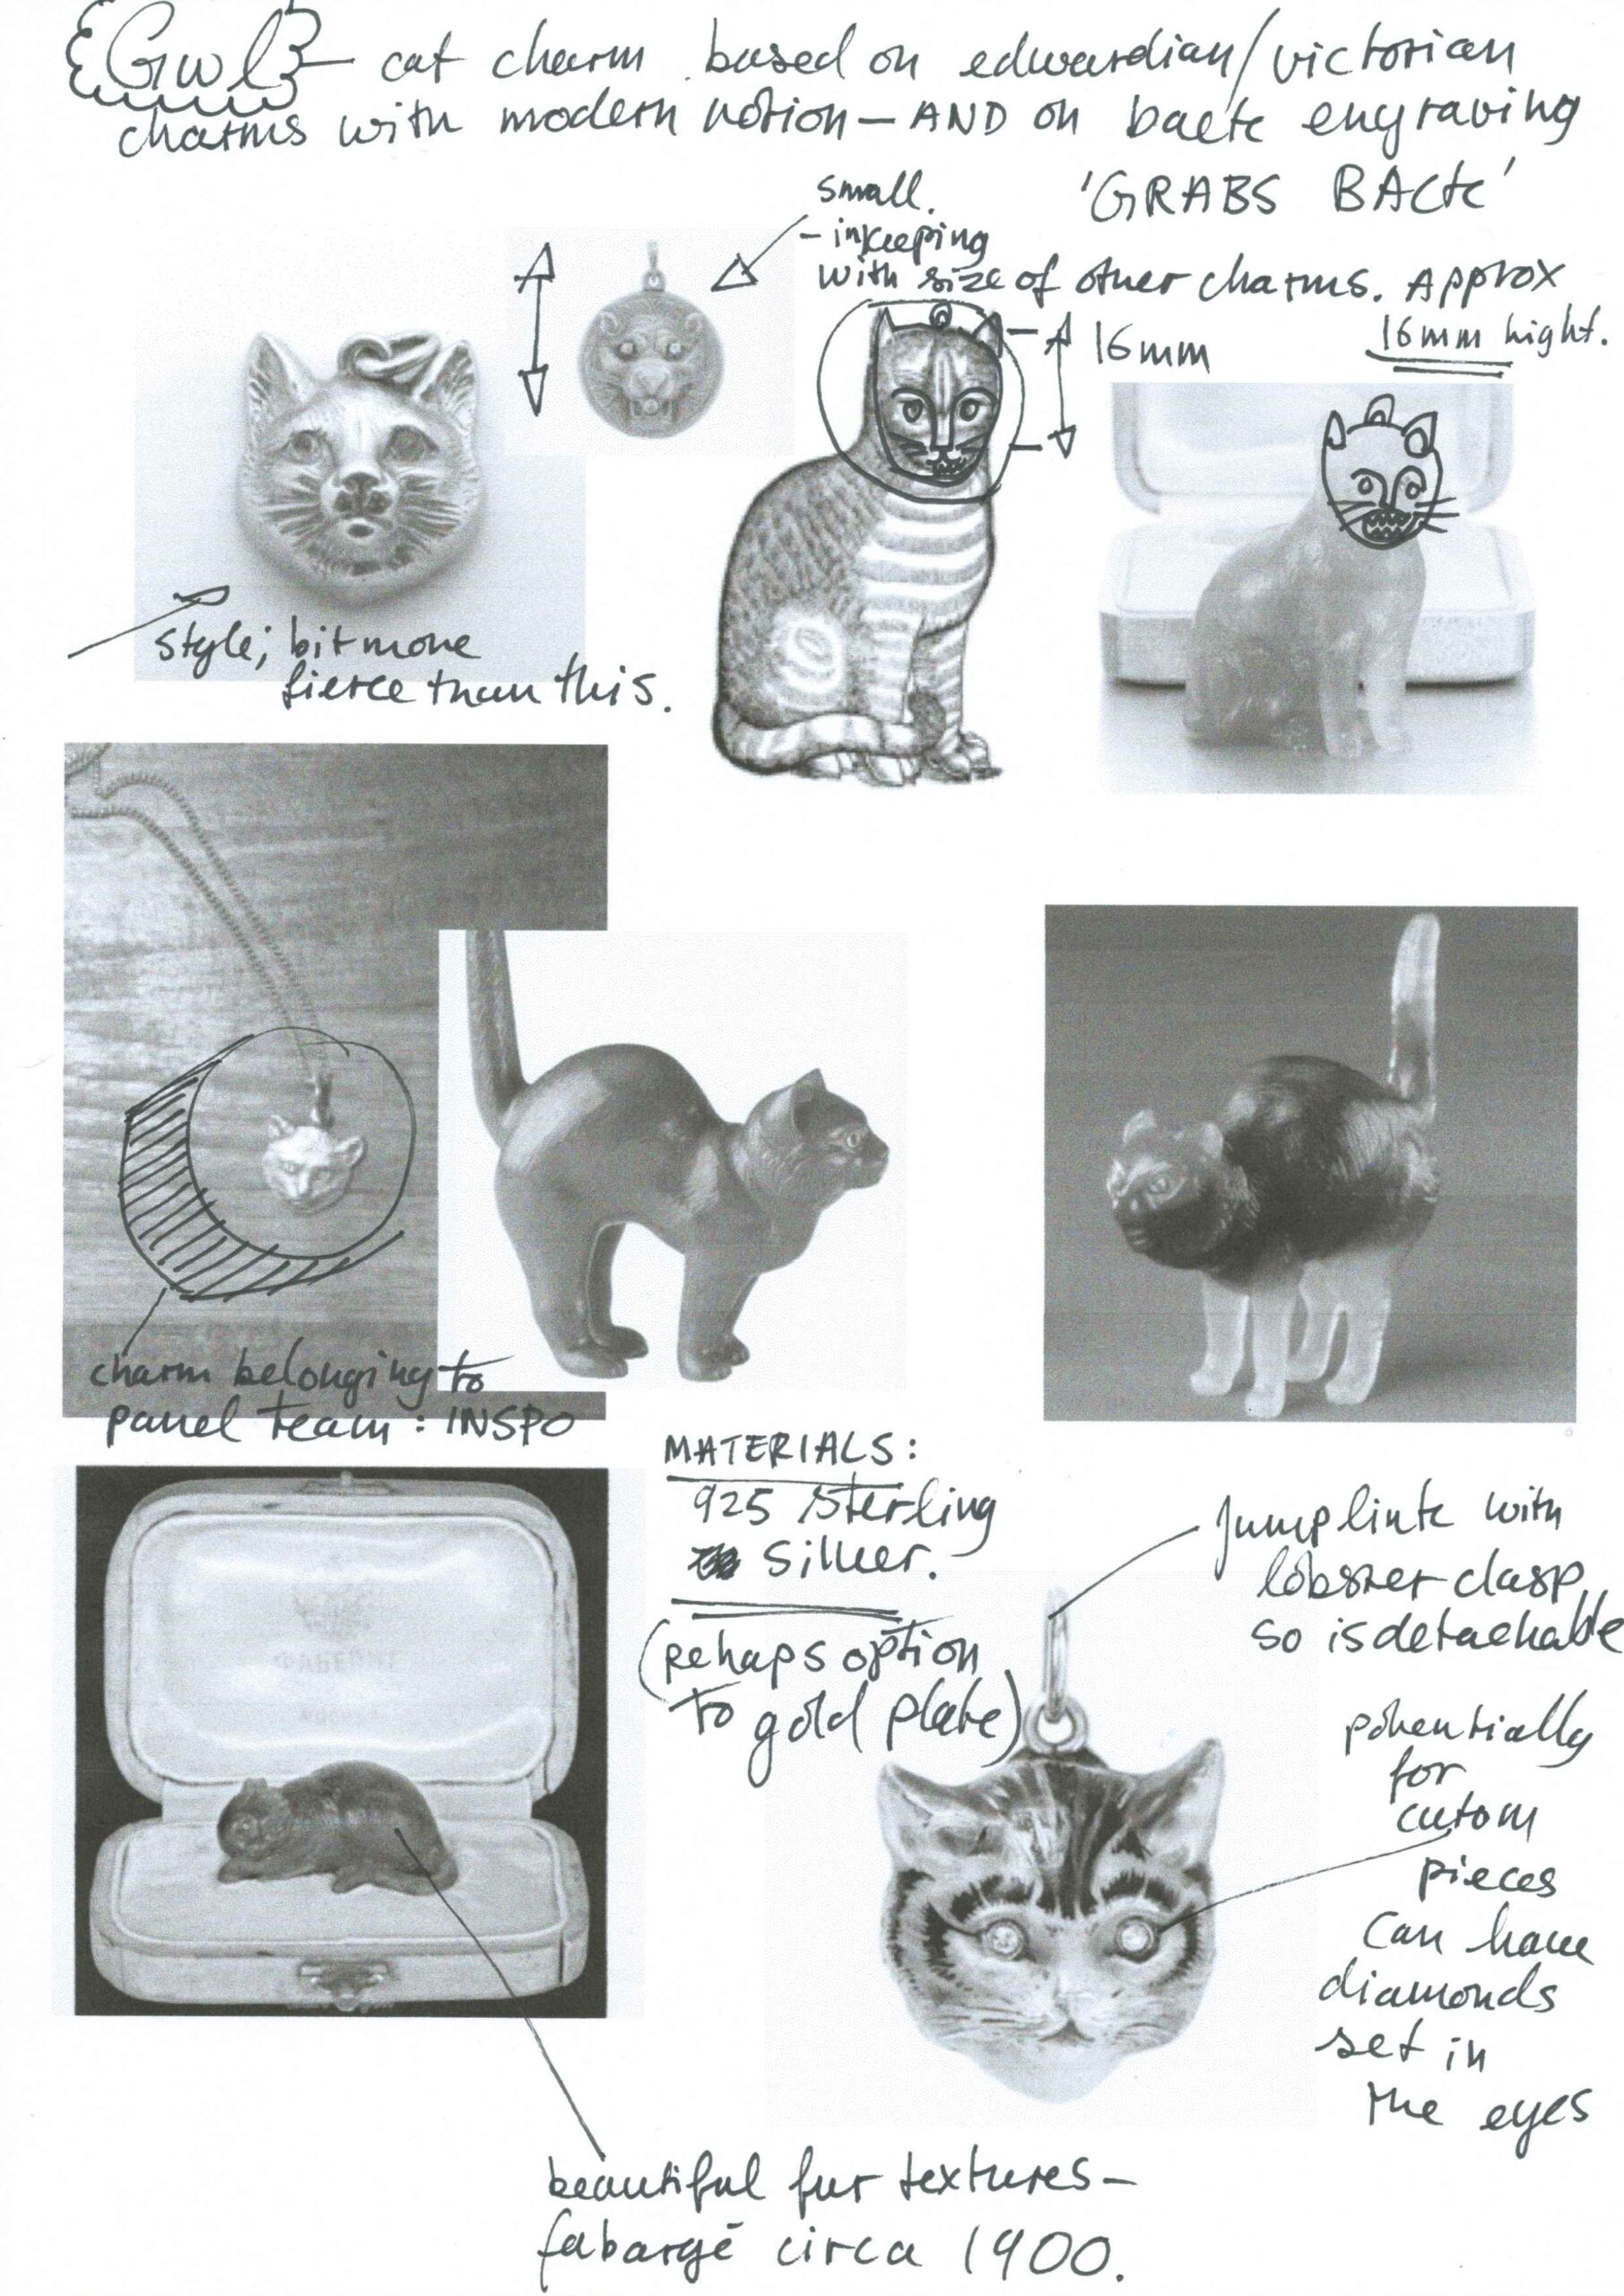 Black and white research collage of cat figurines.